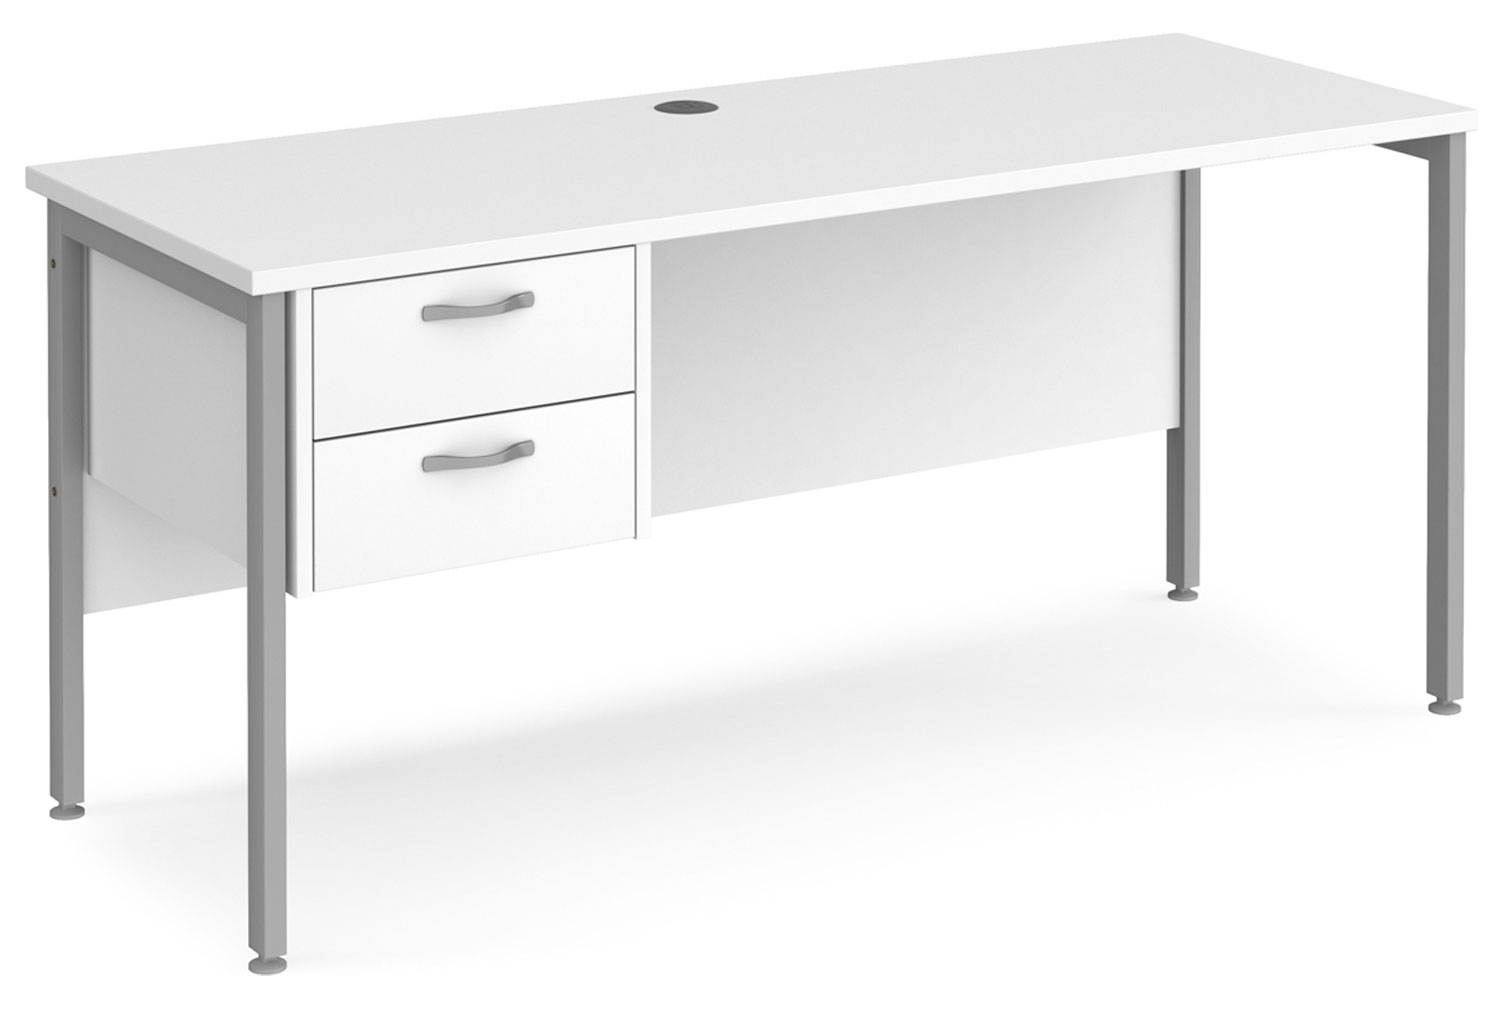 Value Line Deluxe H-Leg Narrow Rectangular Office Desk 2 Drawers (Silver Legs), 160w60dx73h (cm), White, Express Delivery